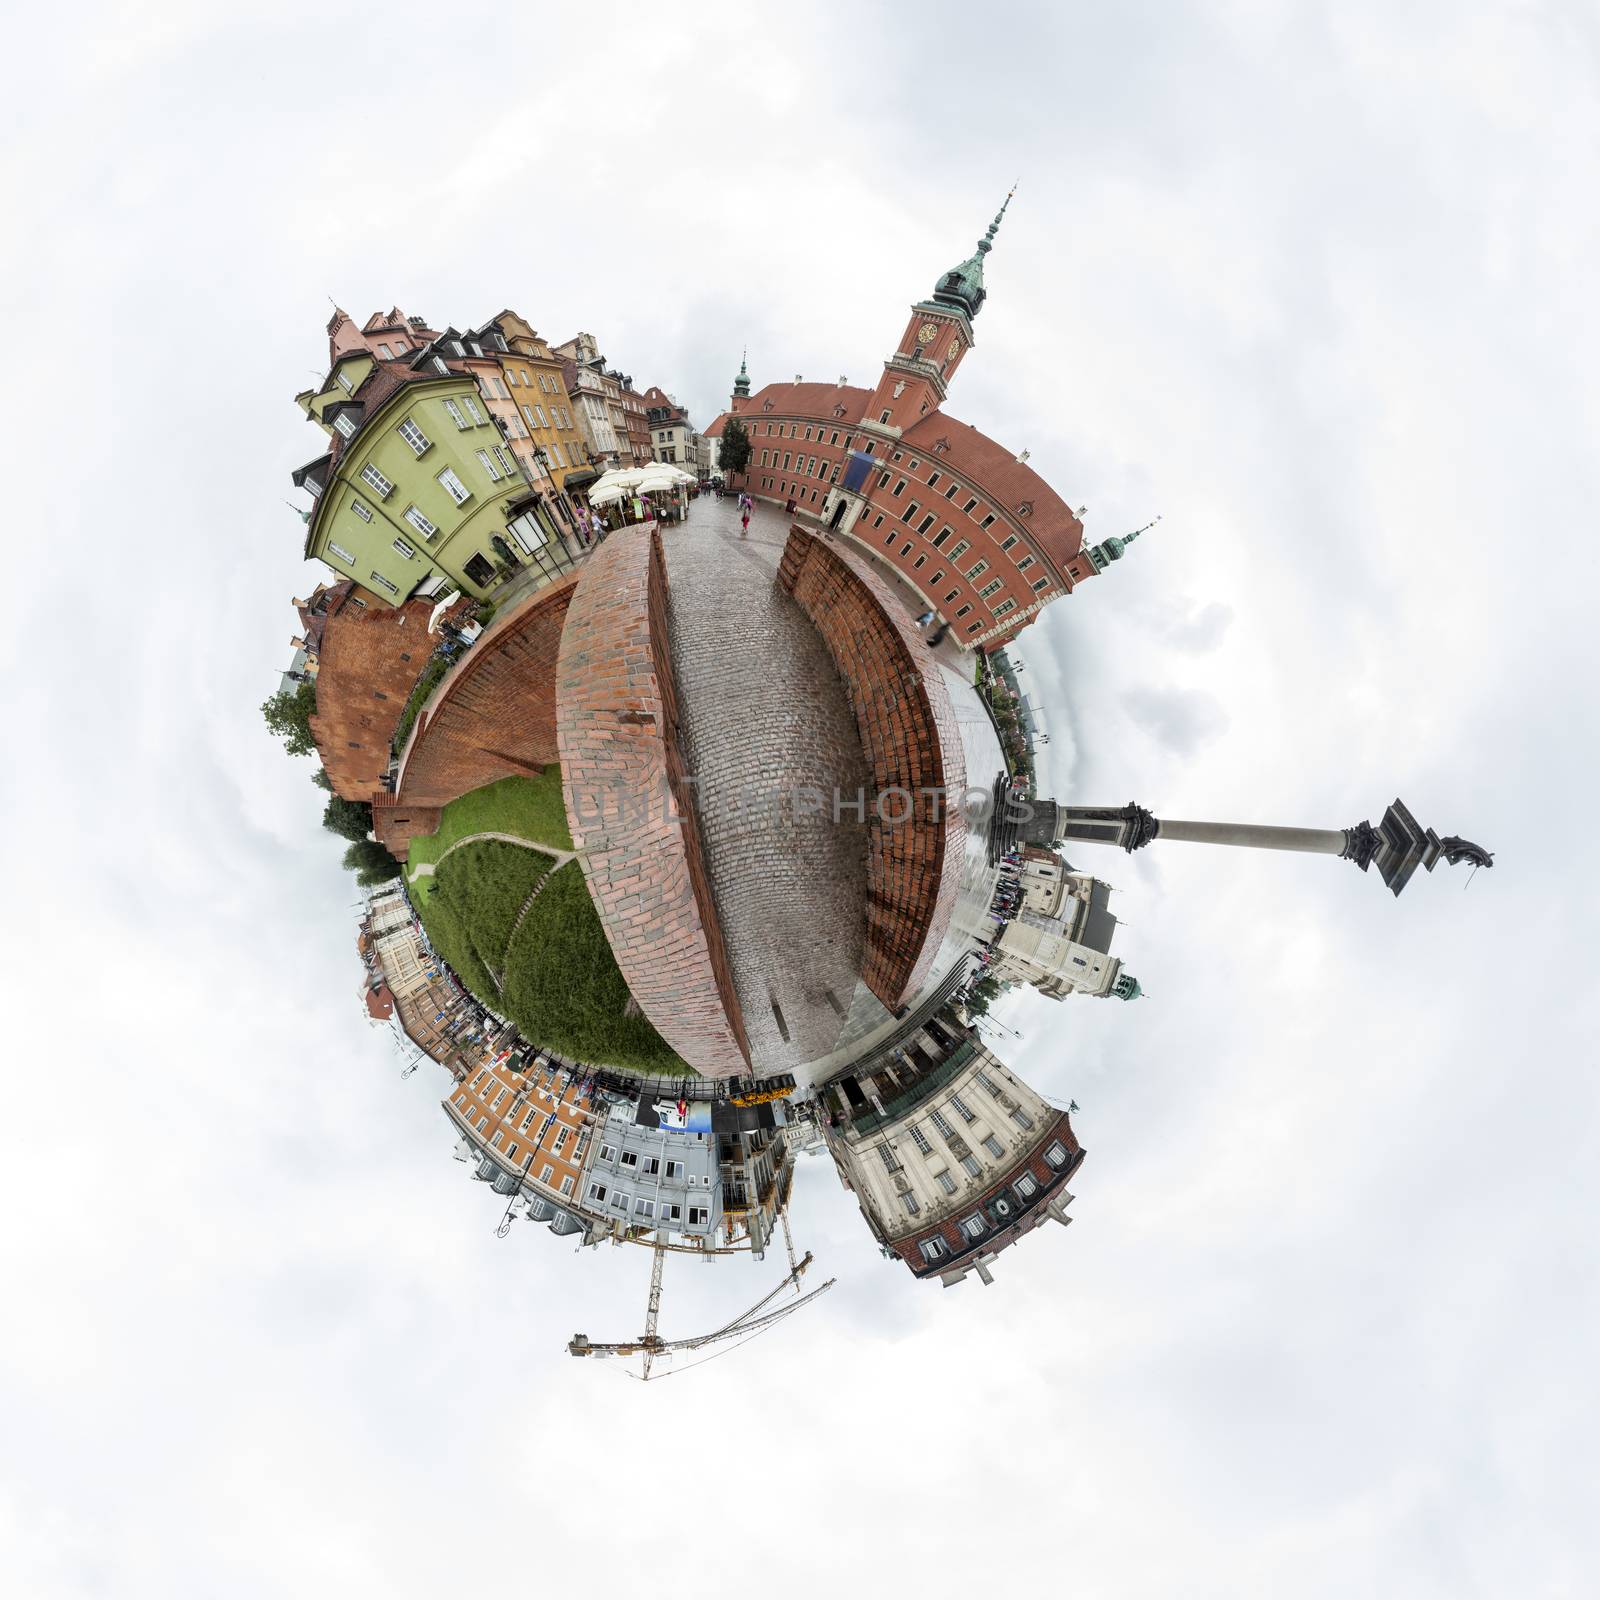 Tiny planet of the Old Town of Warsaw, Poland by ints